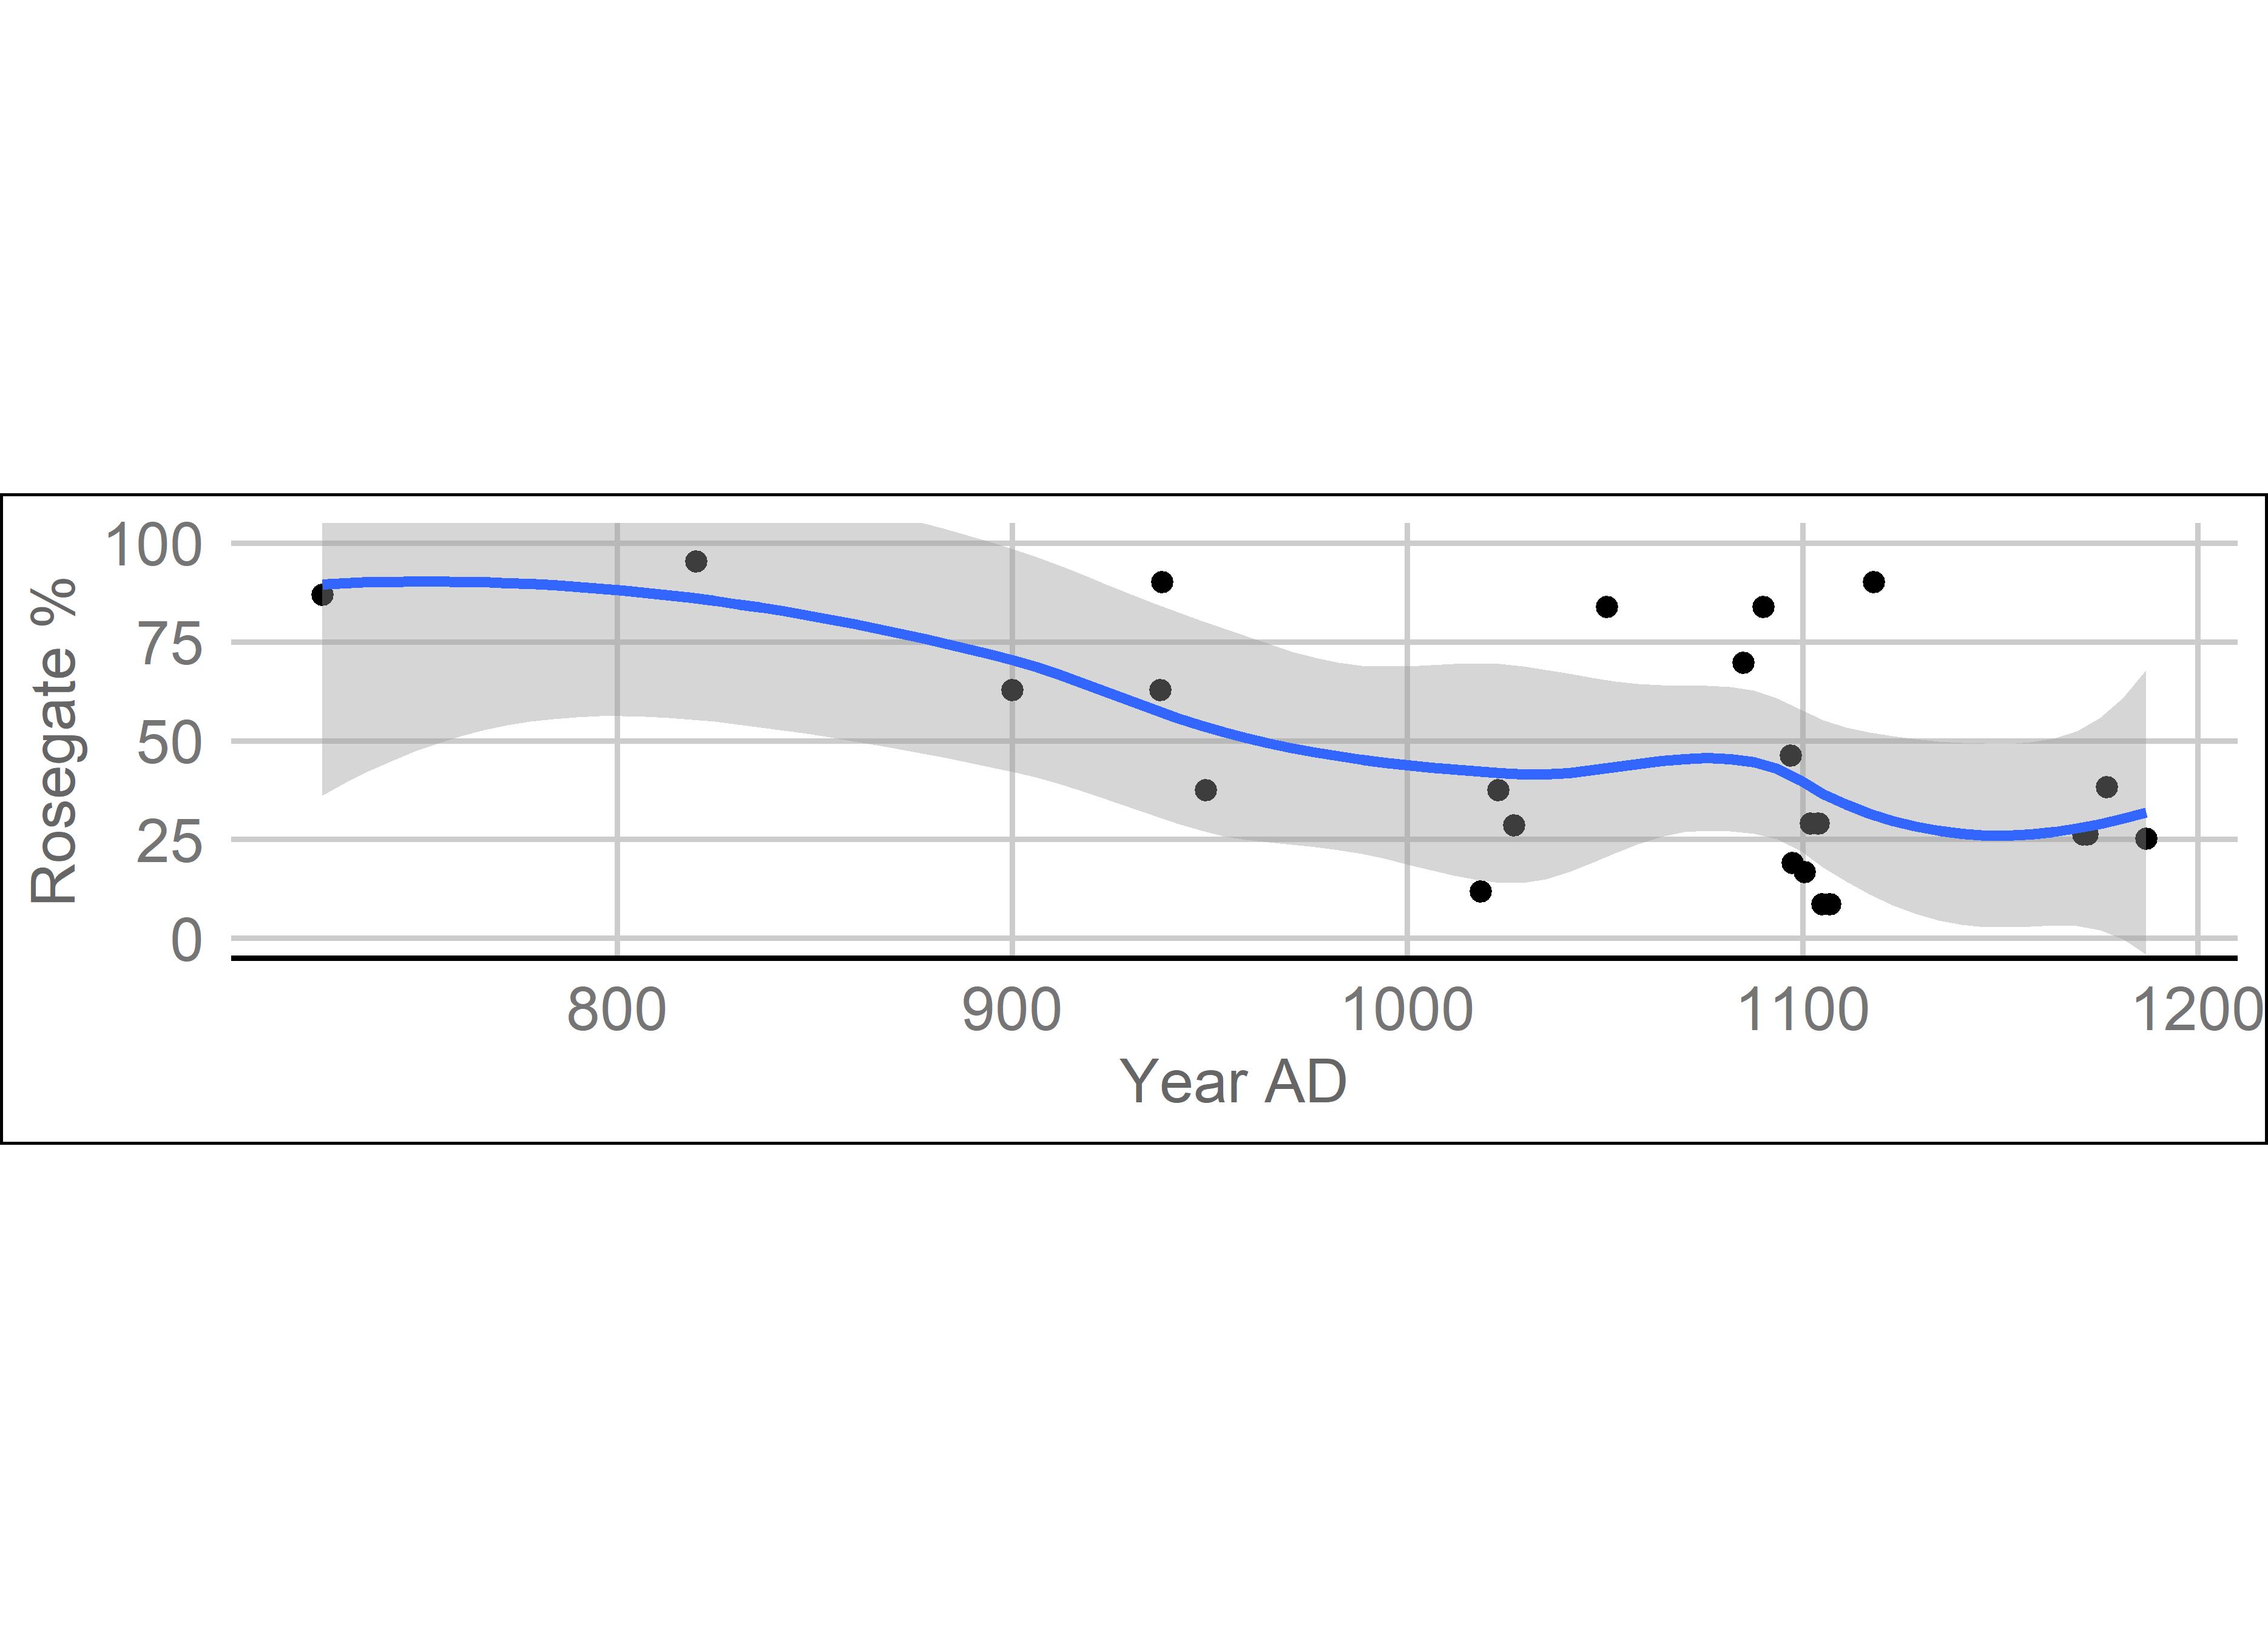 Rosegate percentages plotted against the median calibrated radiocarbon date for each site with a loess smoothing line.